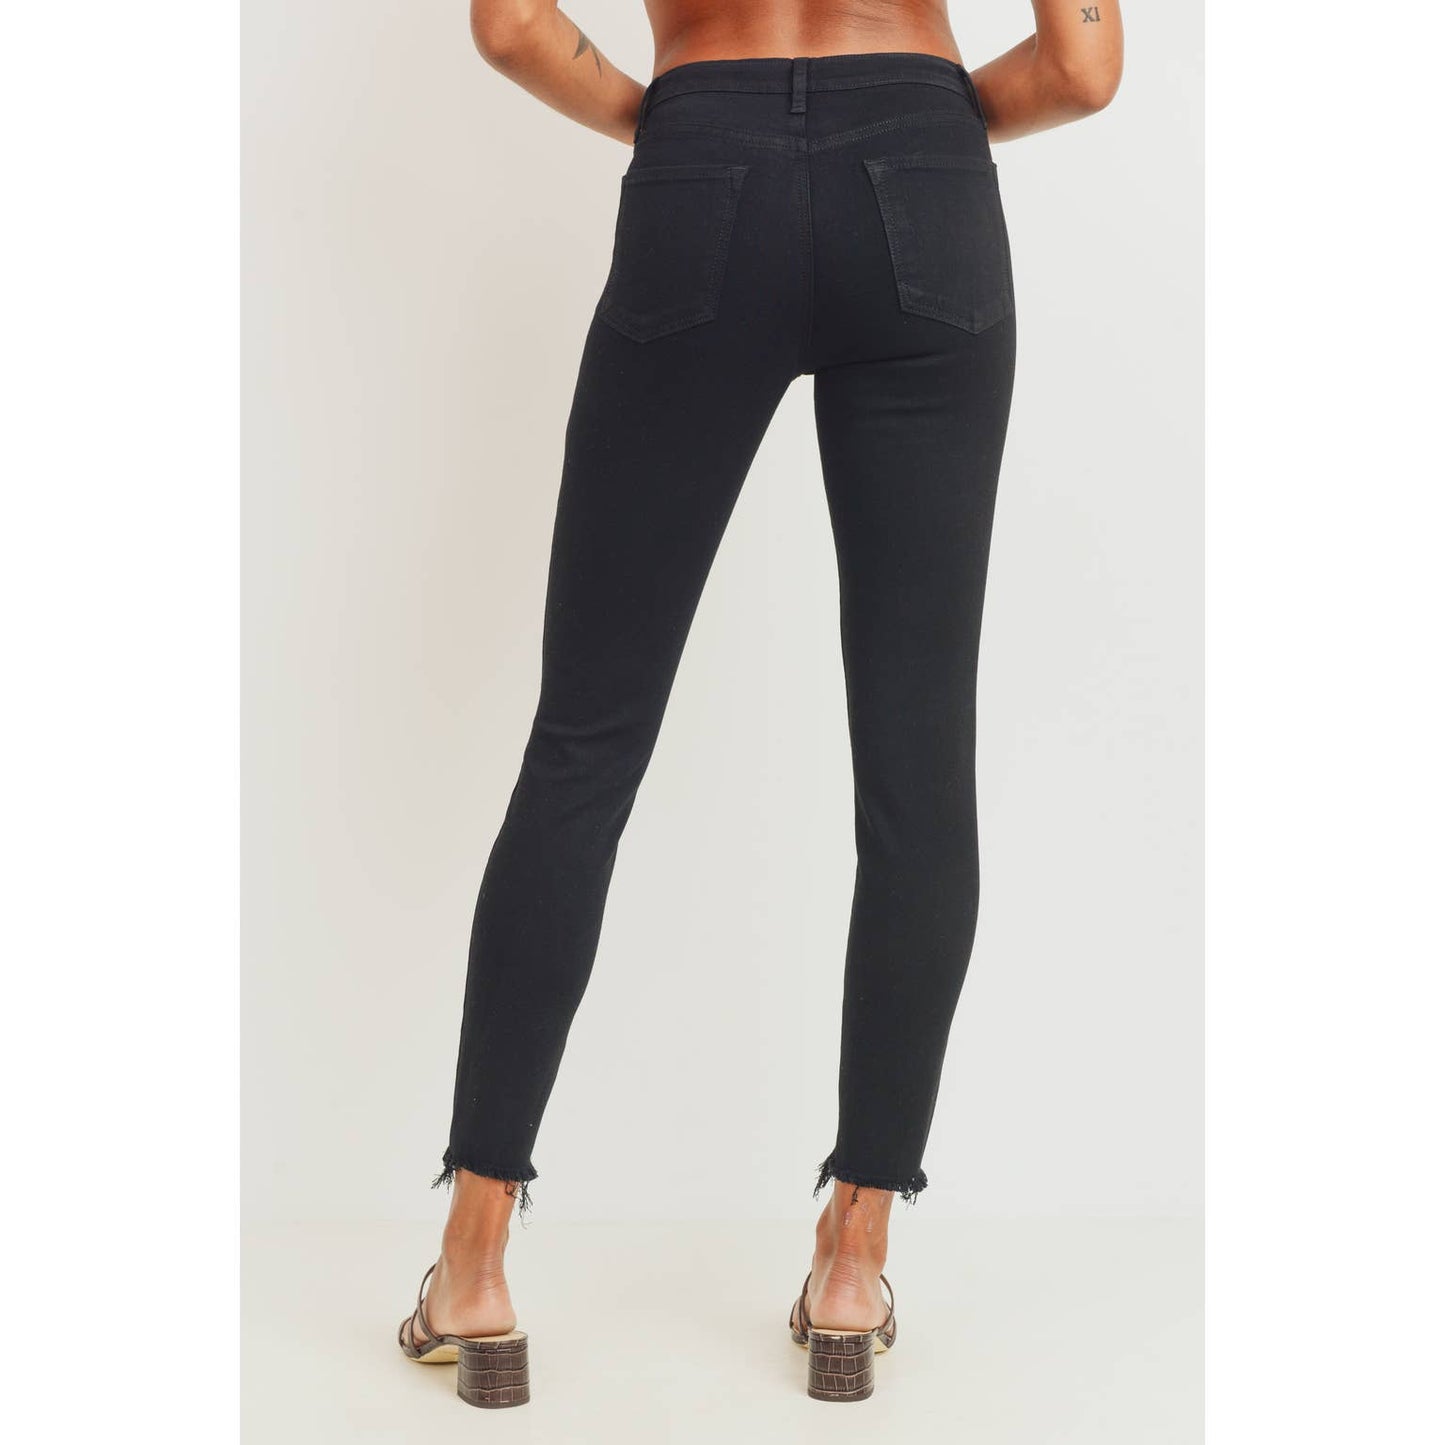 Millie Black Ripped Hem Skinny Jeans - Wild Luxe Boutique